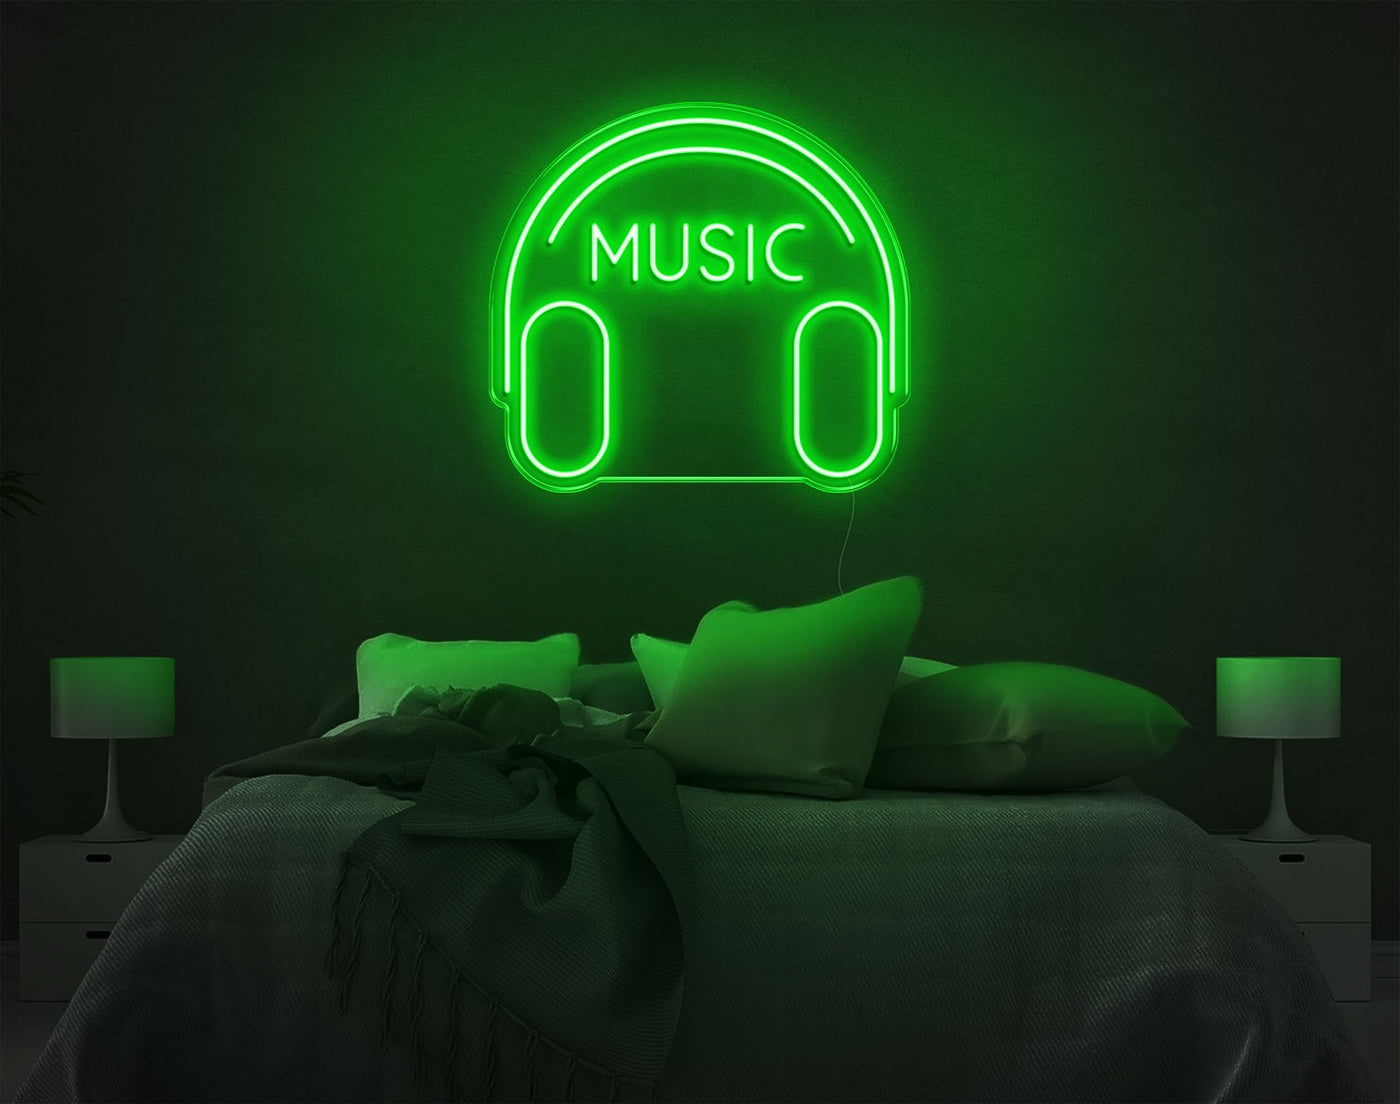 Music V2 LED Neon Sign - 19inch x 20inchGreen